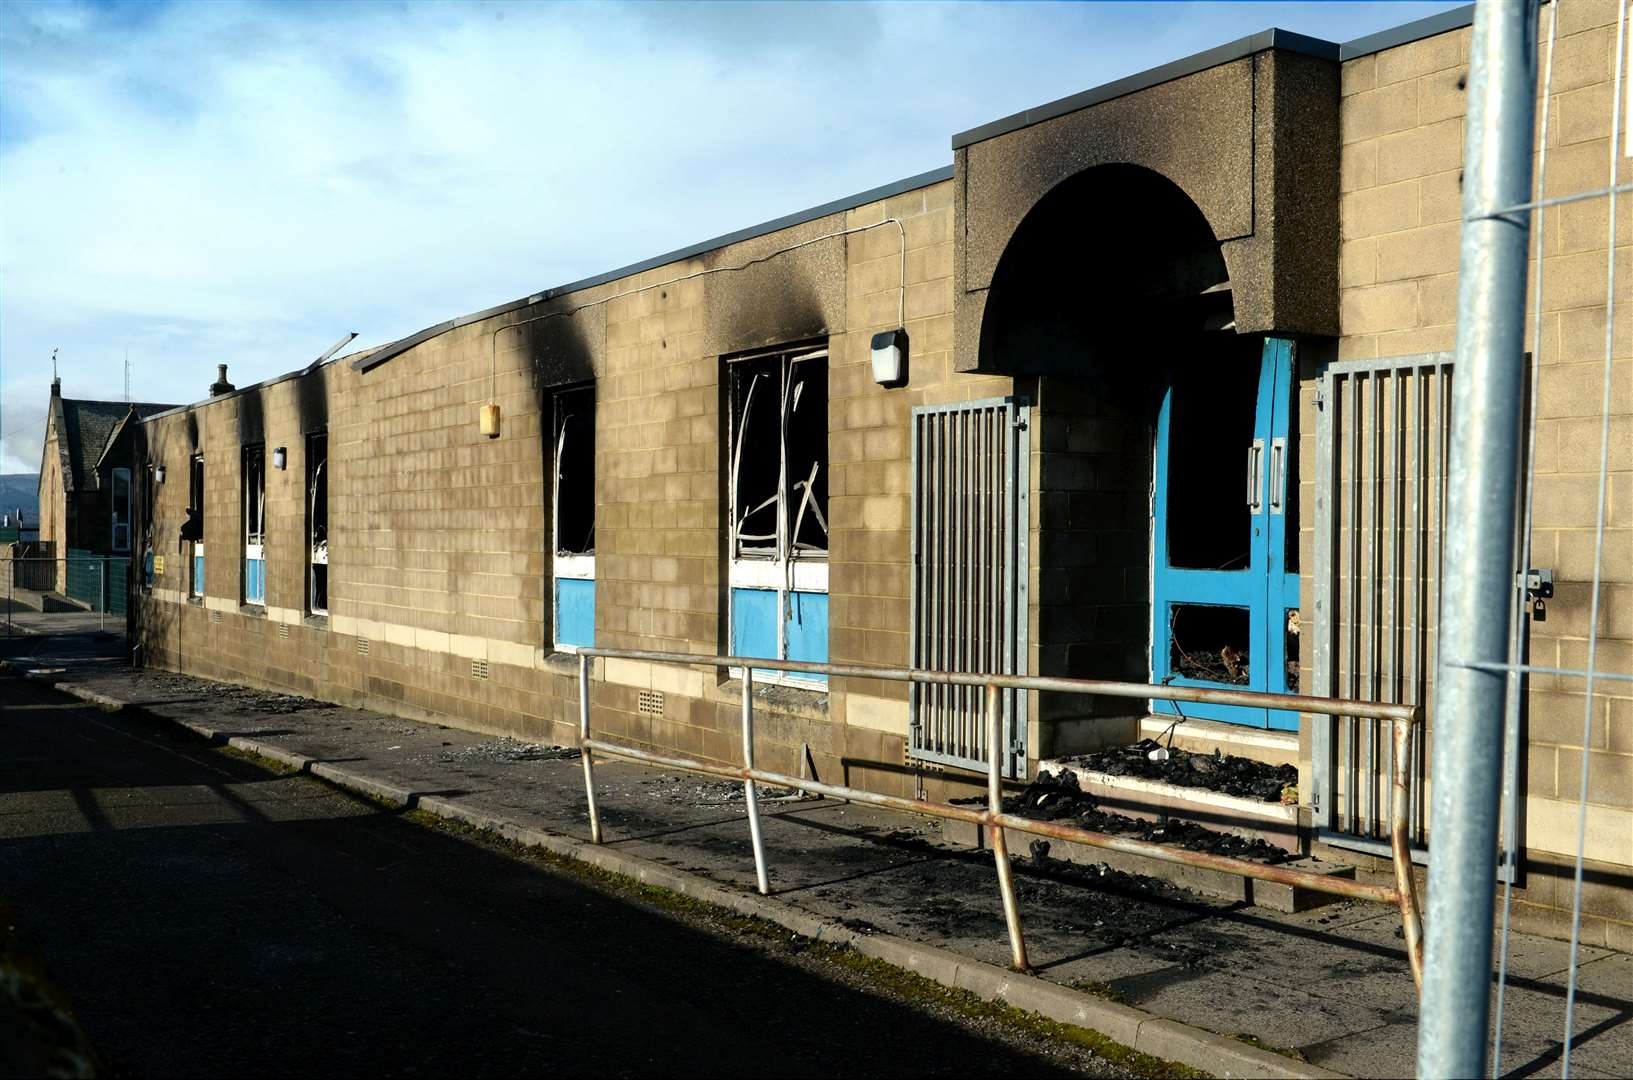 Park Primary School the day after the fire in February 2020. Photo: James MacKenzie